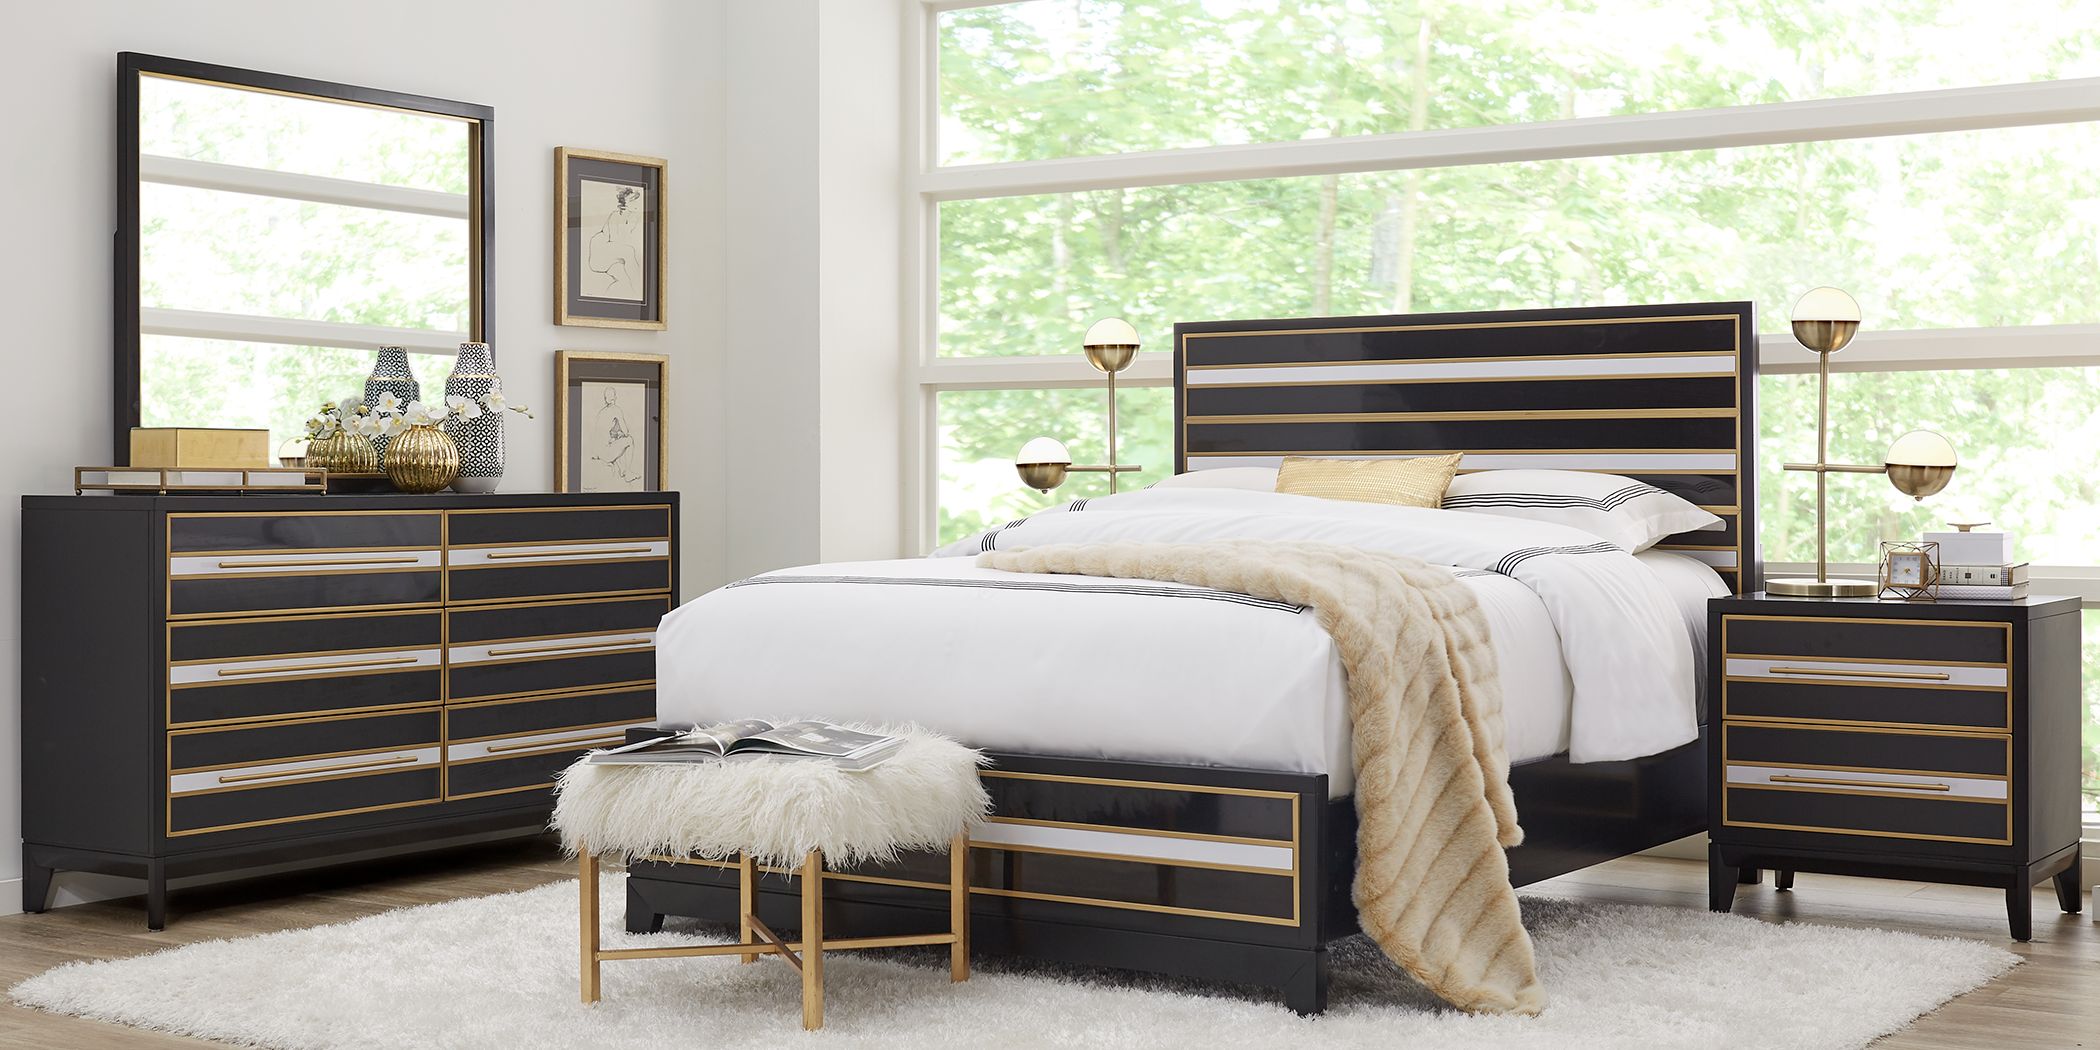 Bedroom Furniture Rooms To, Sofia Vergara King Bed